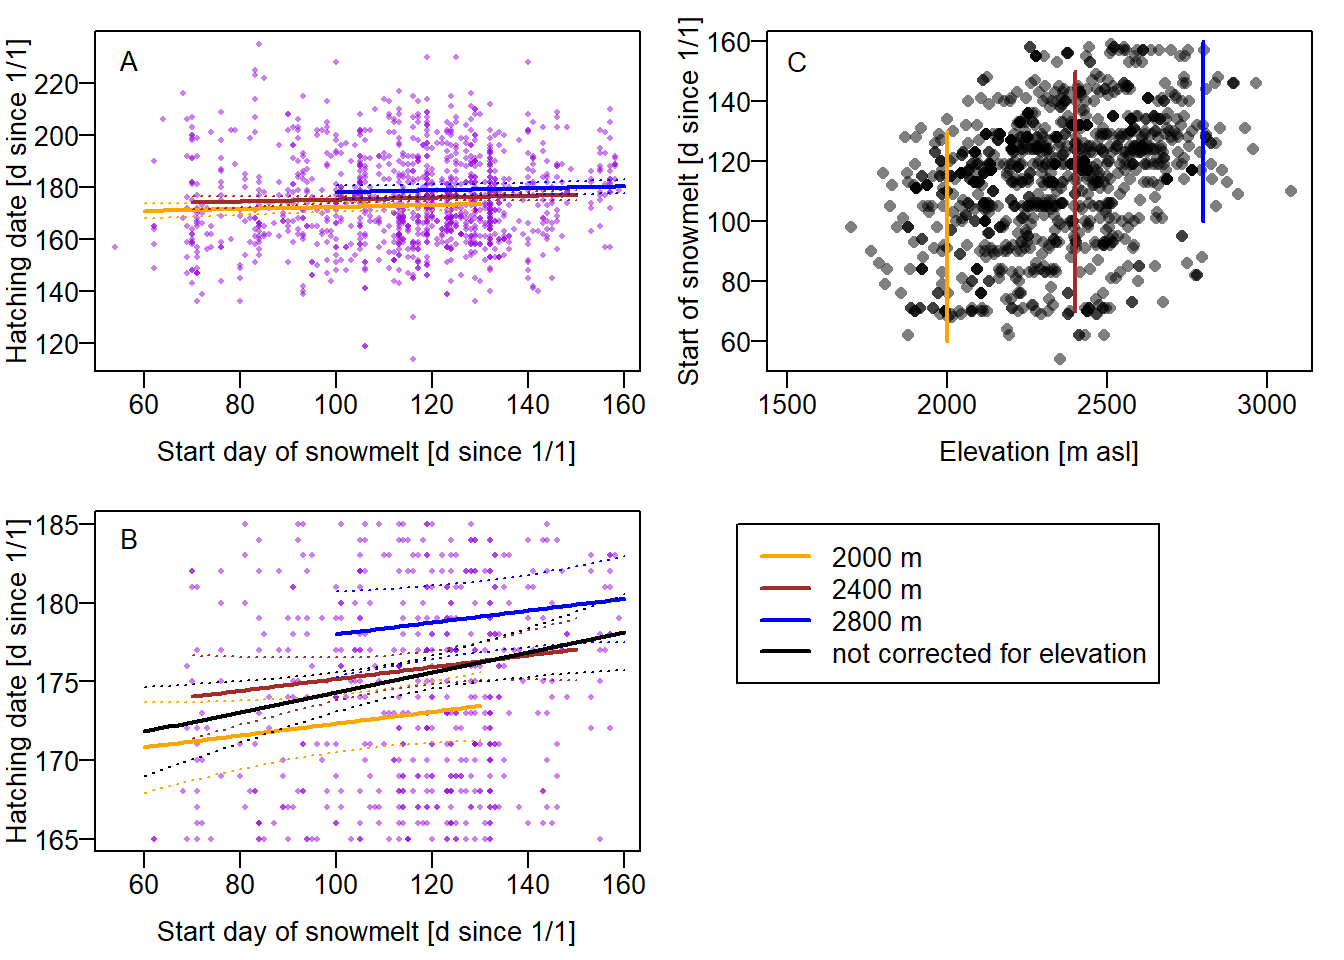 Illustration of the partial coefficient of snow melt date in a  model of hatching date. Panel A shows the entire raw data together with the regression lines drawn for three different elevations. The regression lines span the range of snow melt dates occurring at the respective elevation (shown in panel C). Panel B is the same as panel A, but zoomed in to the better see the regression lines and with an additional regression line (in black) from the model that does not take elevation into account.